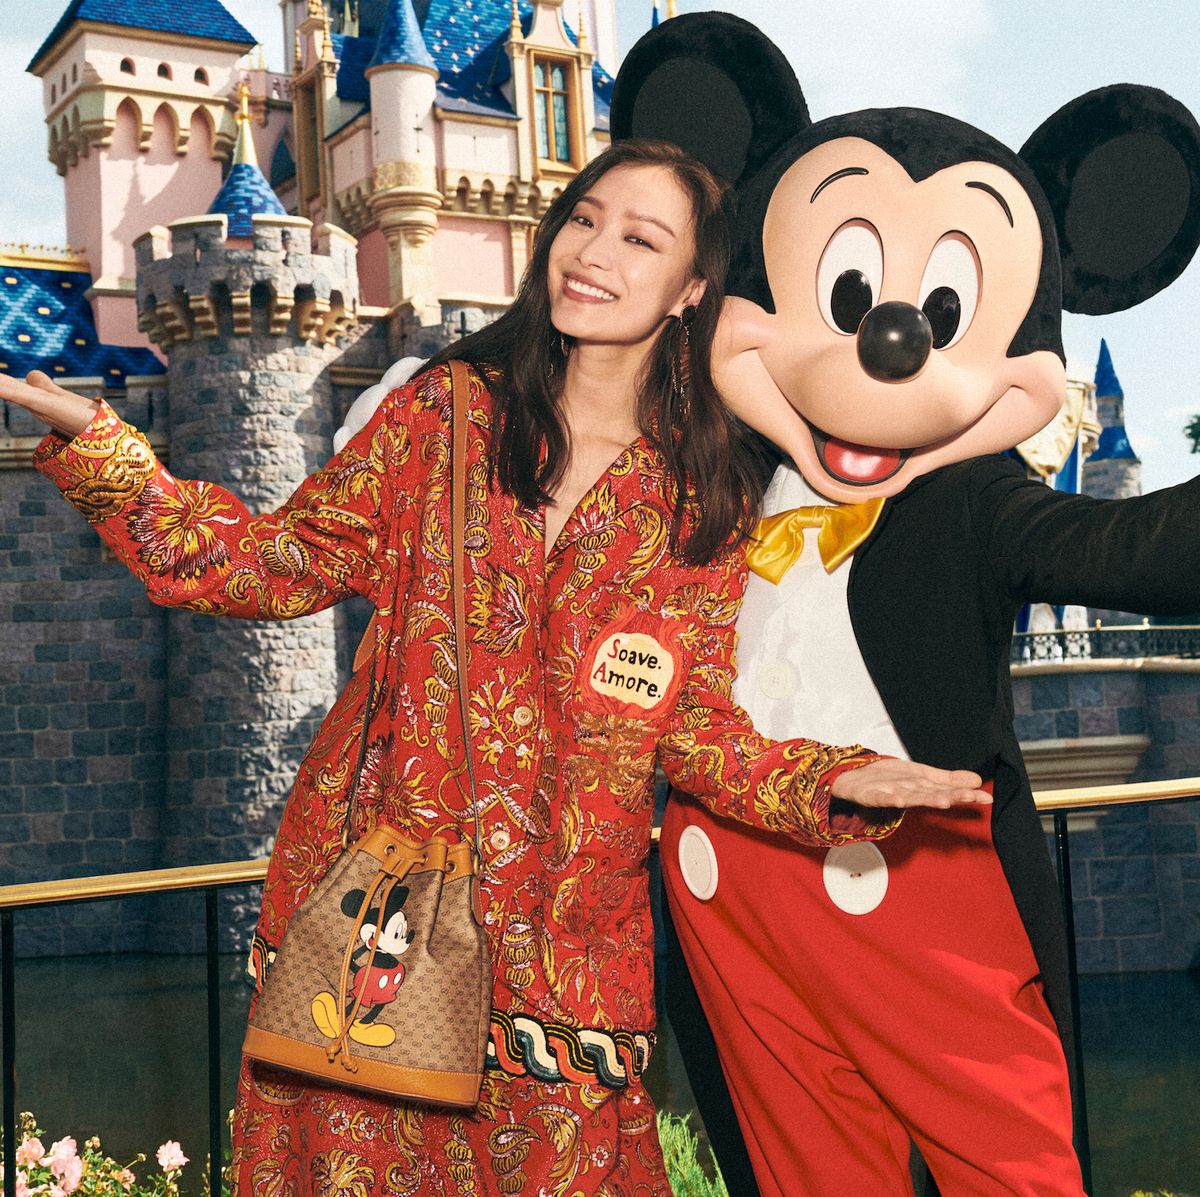 Lunar New Year Styles Inspired by Mickey Mouse, Mickey Rat, Tom and Jerry'  – The Hollywood Reporter